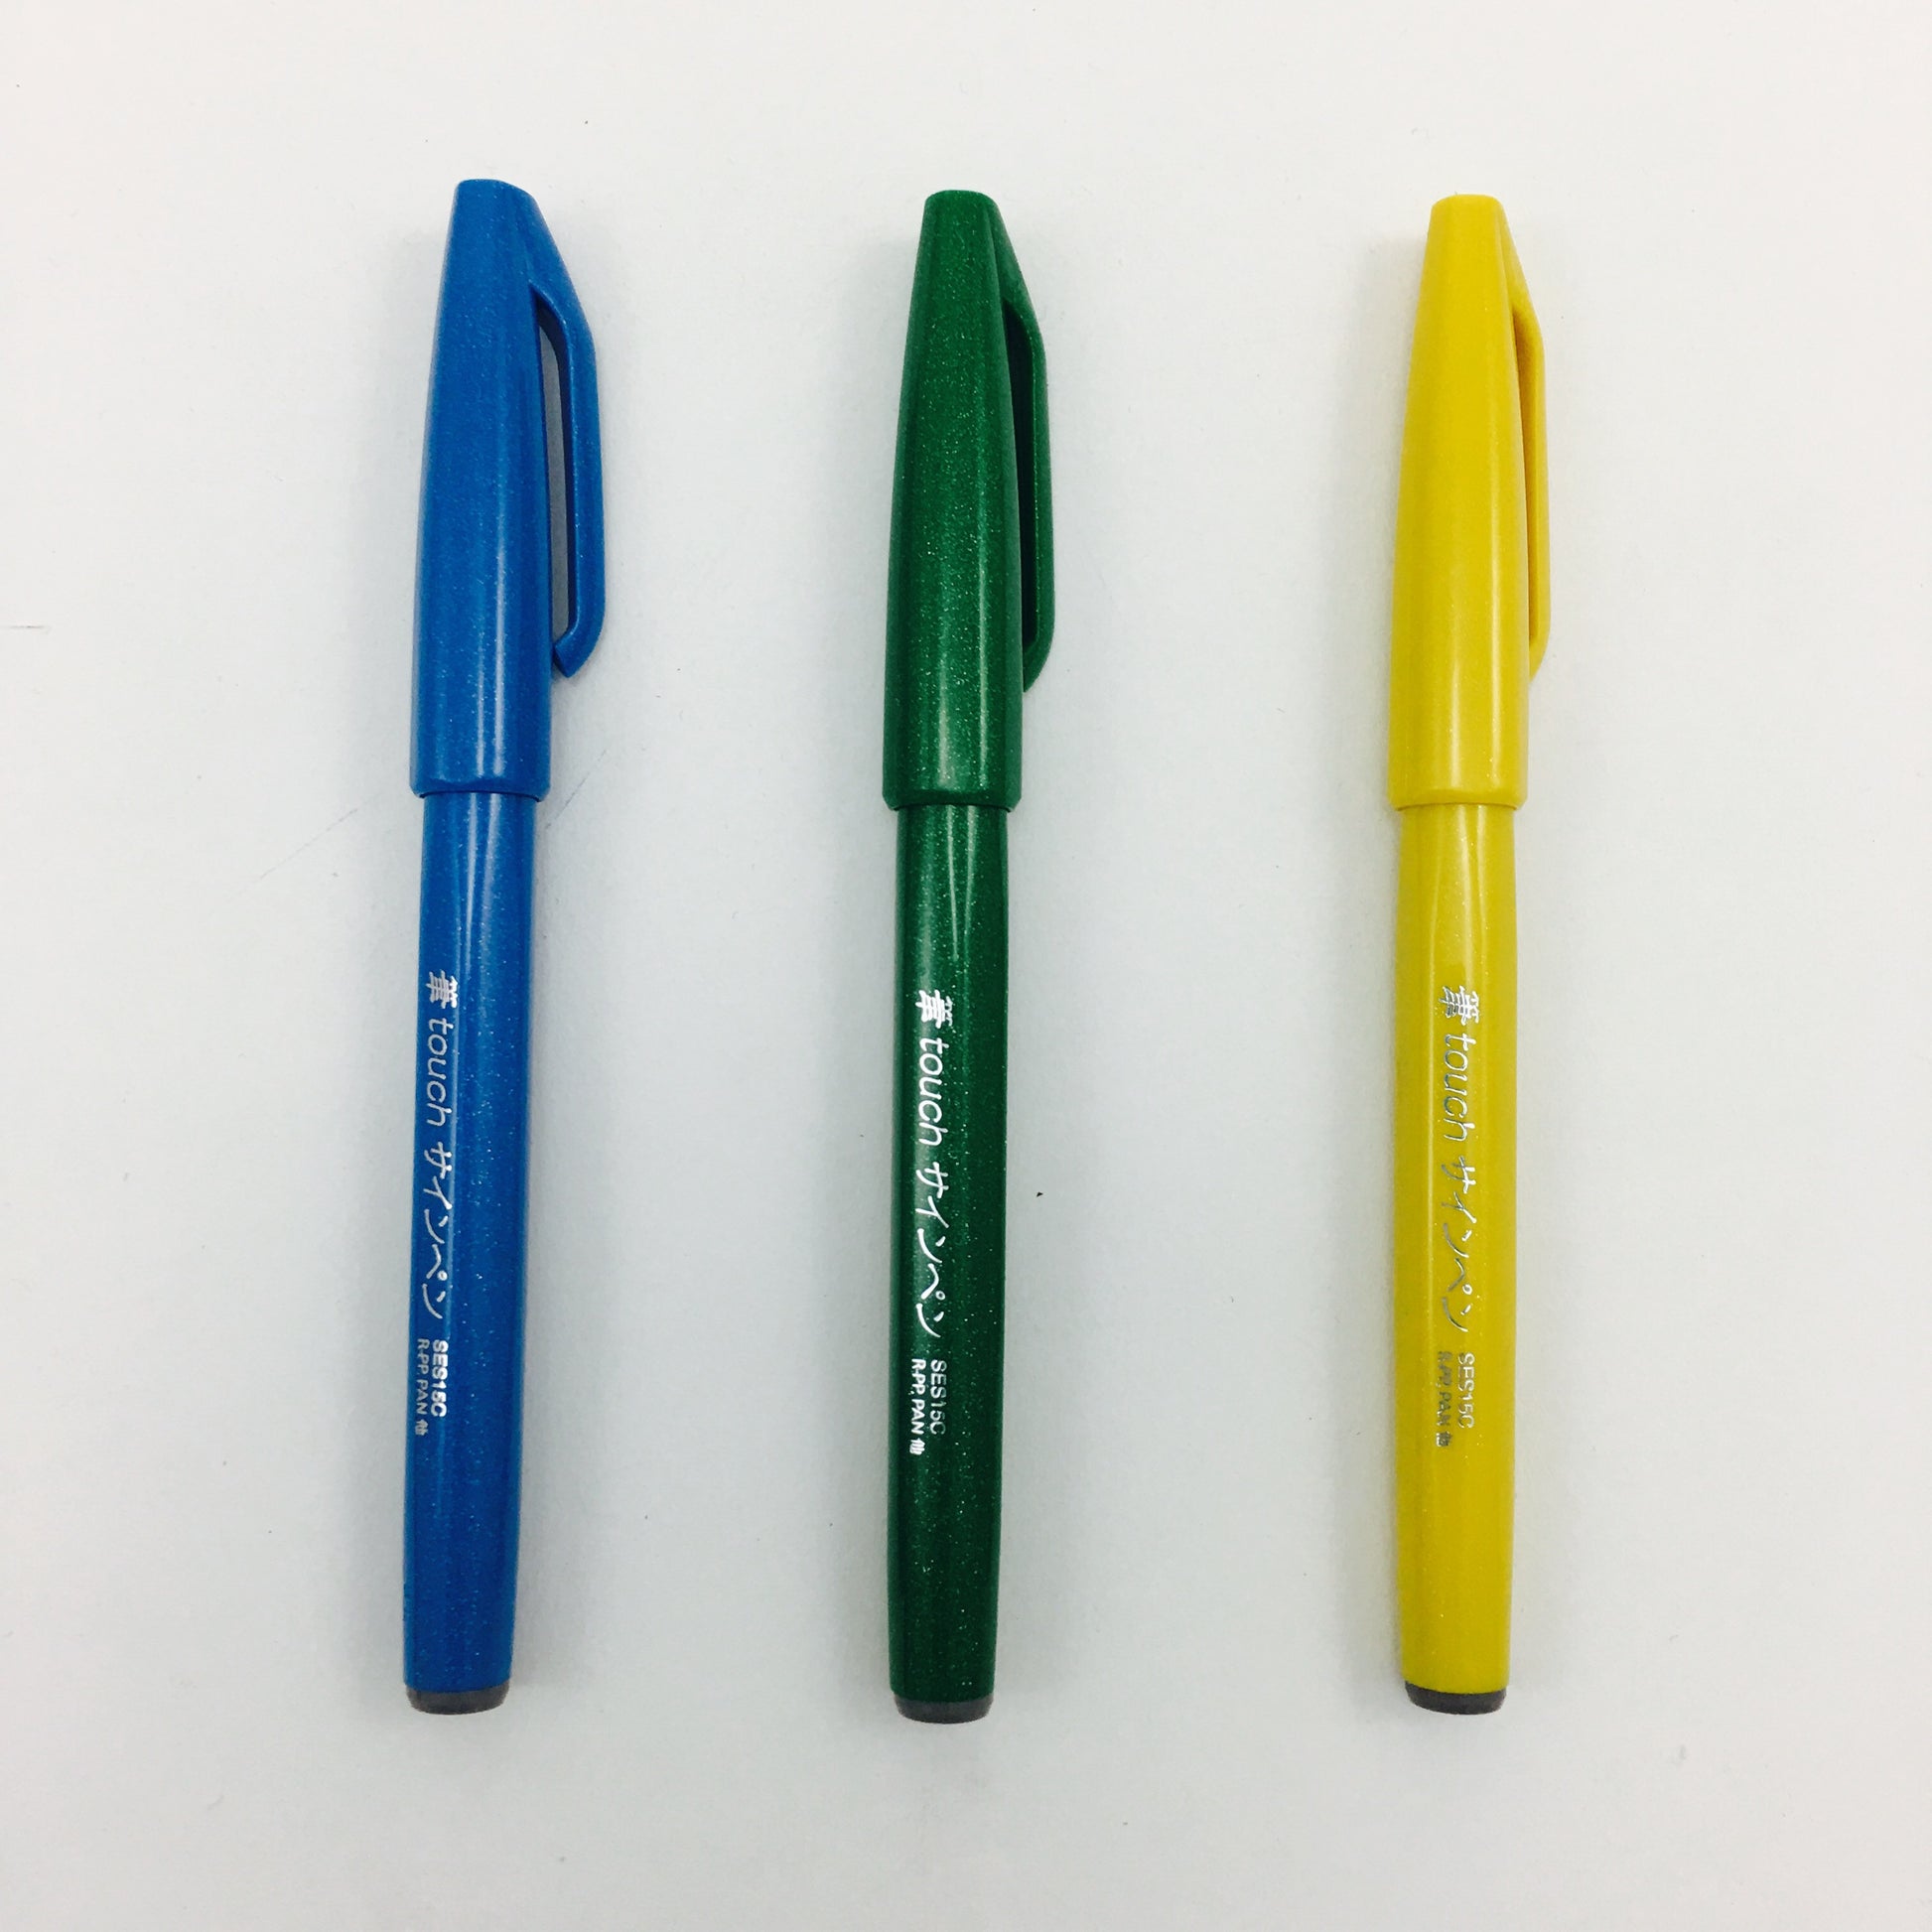 Pens & Markers - Office Products